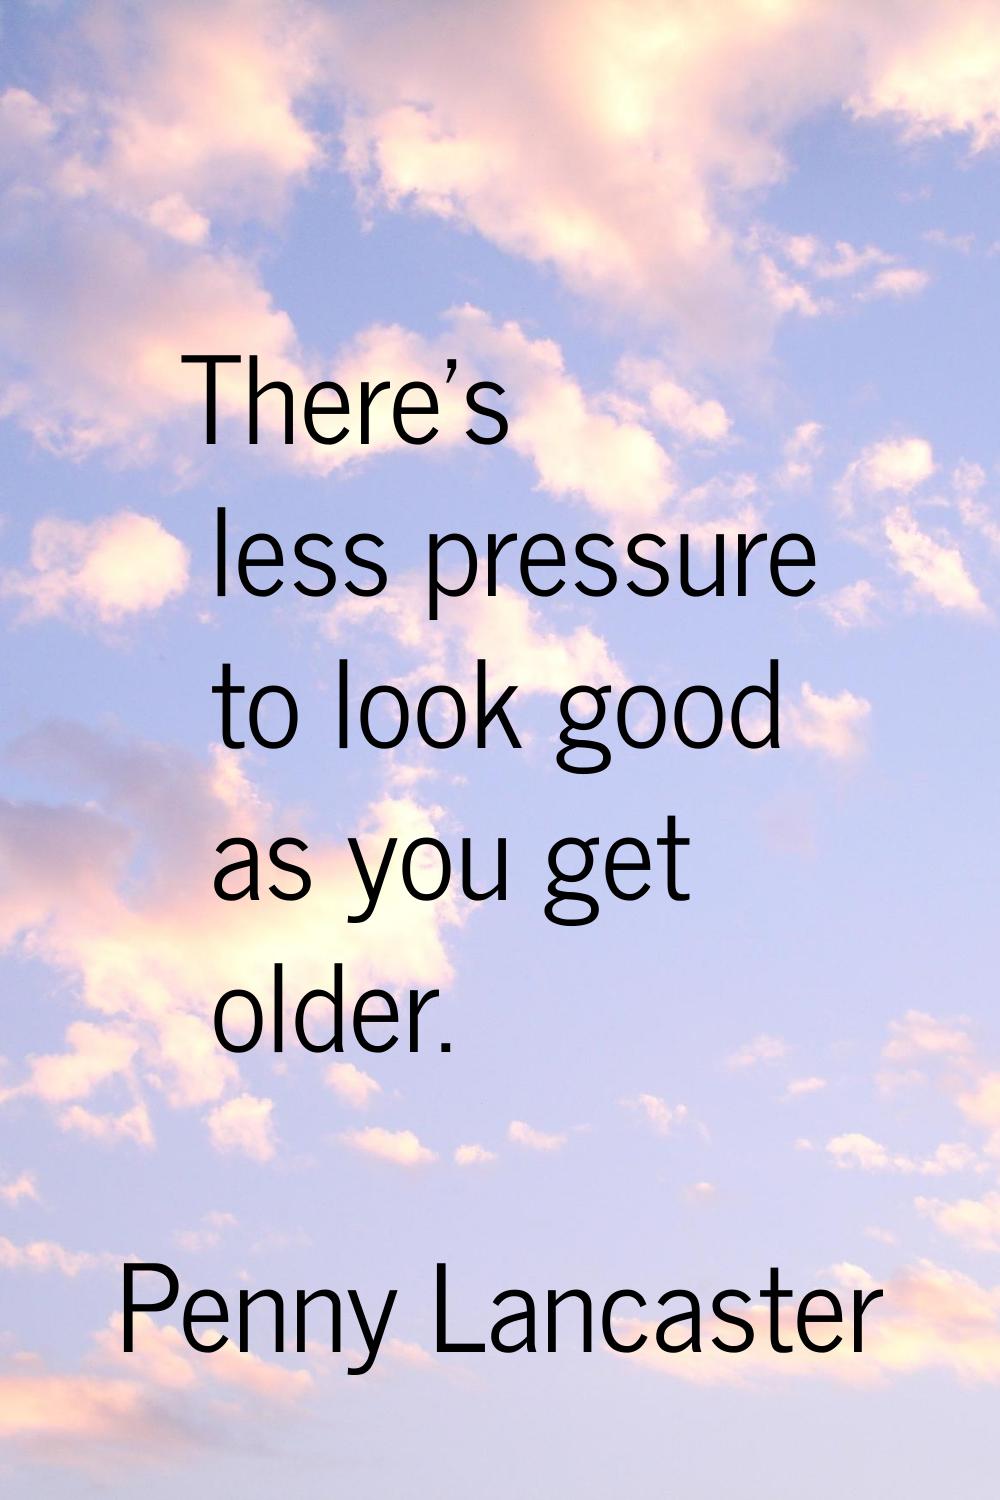 There's less pressure to look good as you get older.